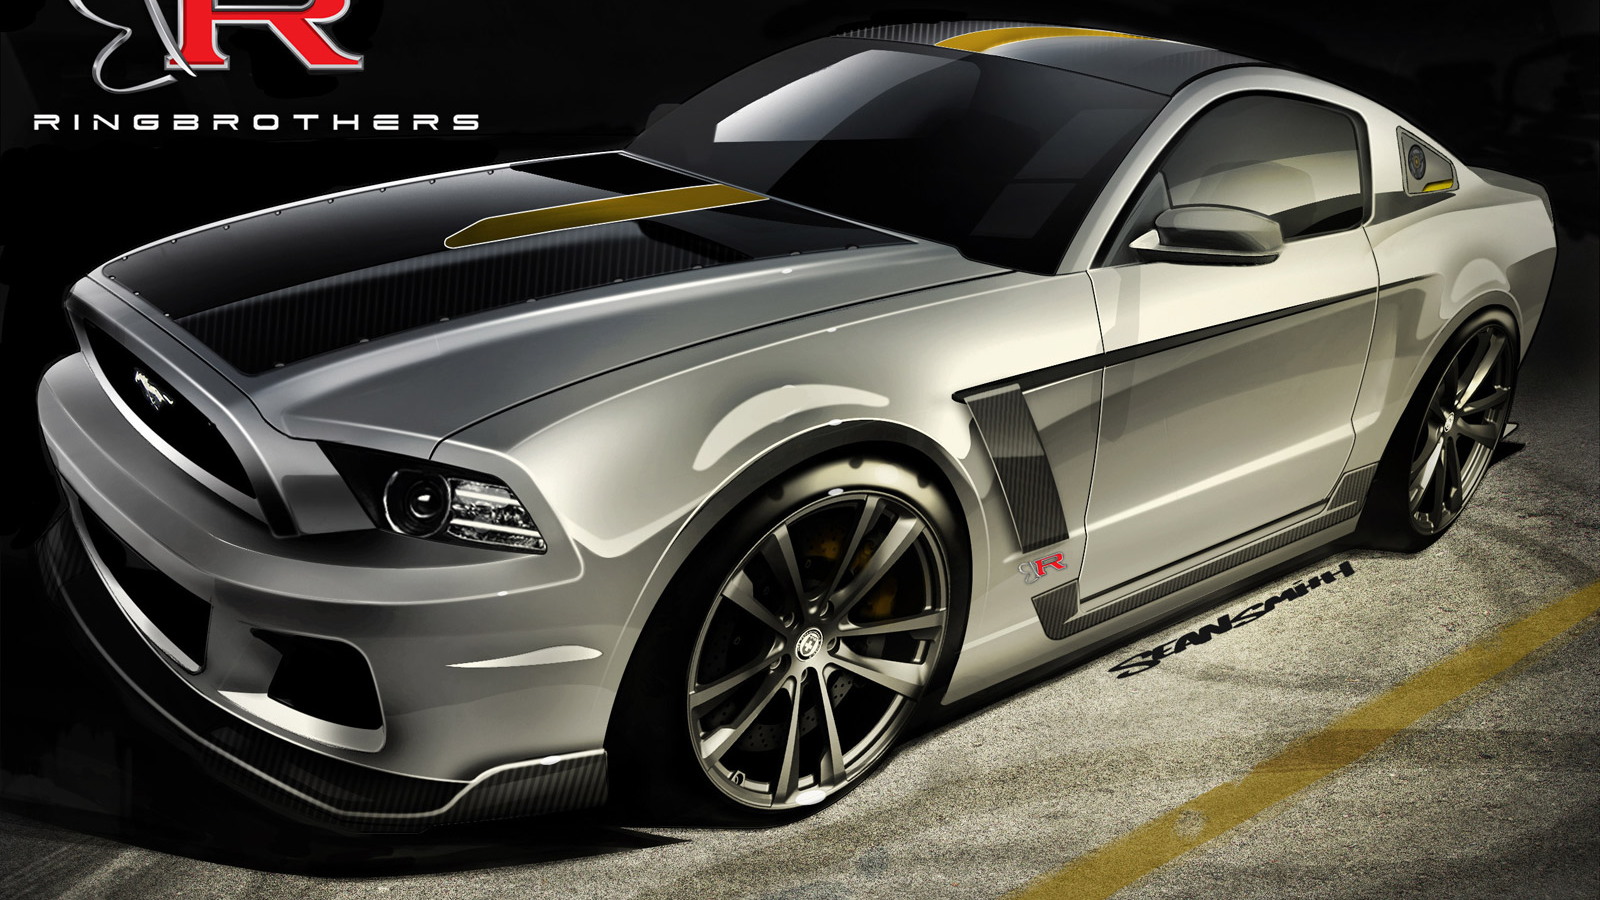 2013 Ford Mustang GT - Built by Ringbrothers